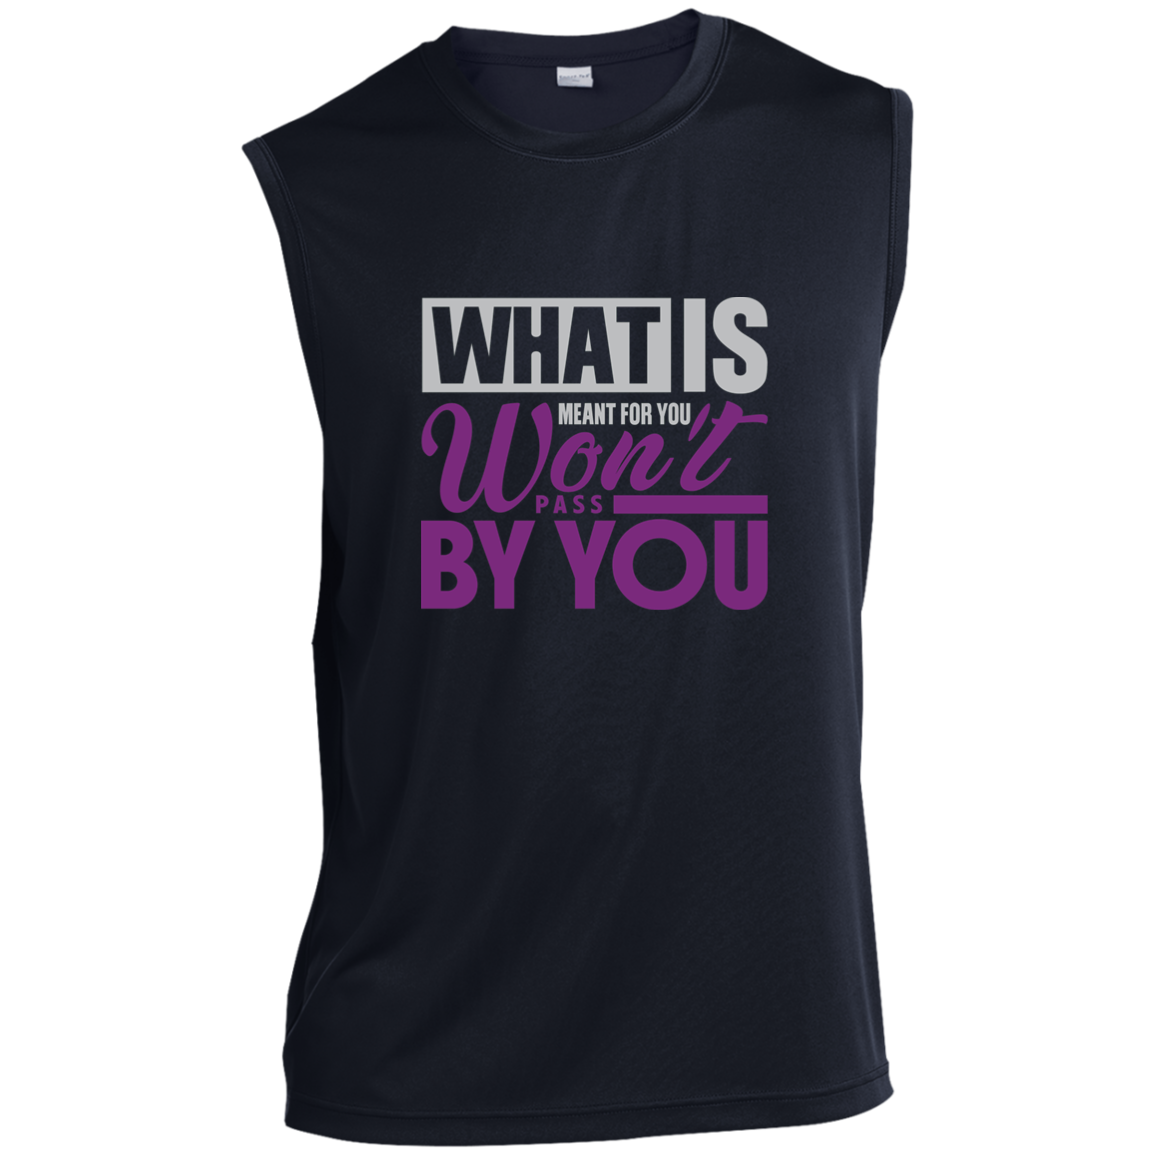 WHAT IS MEANT FOR YOU Sleeveless Performance Tee